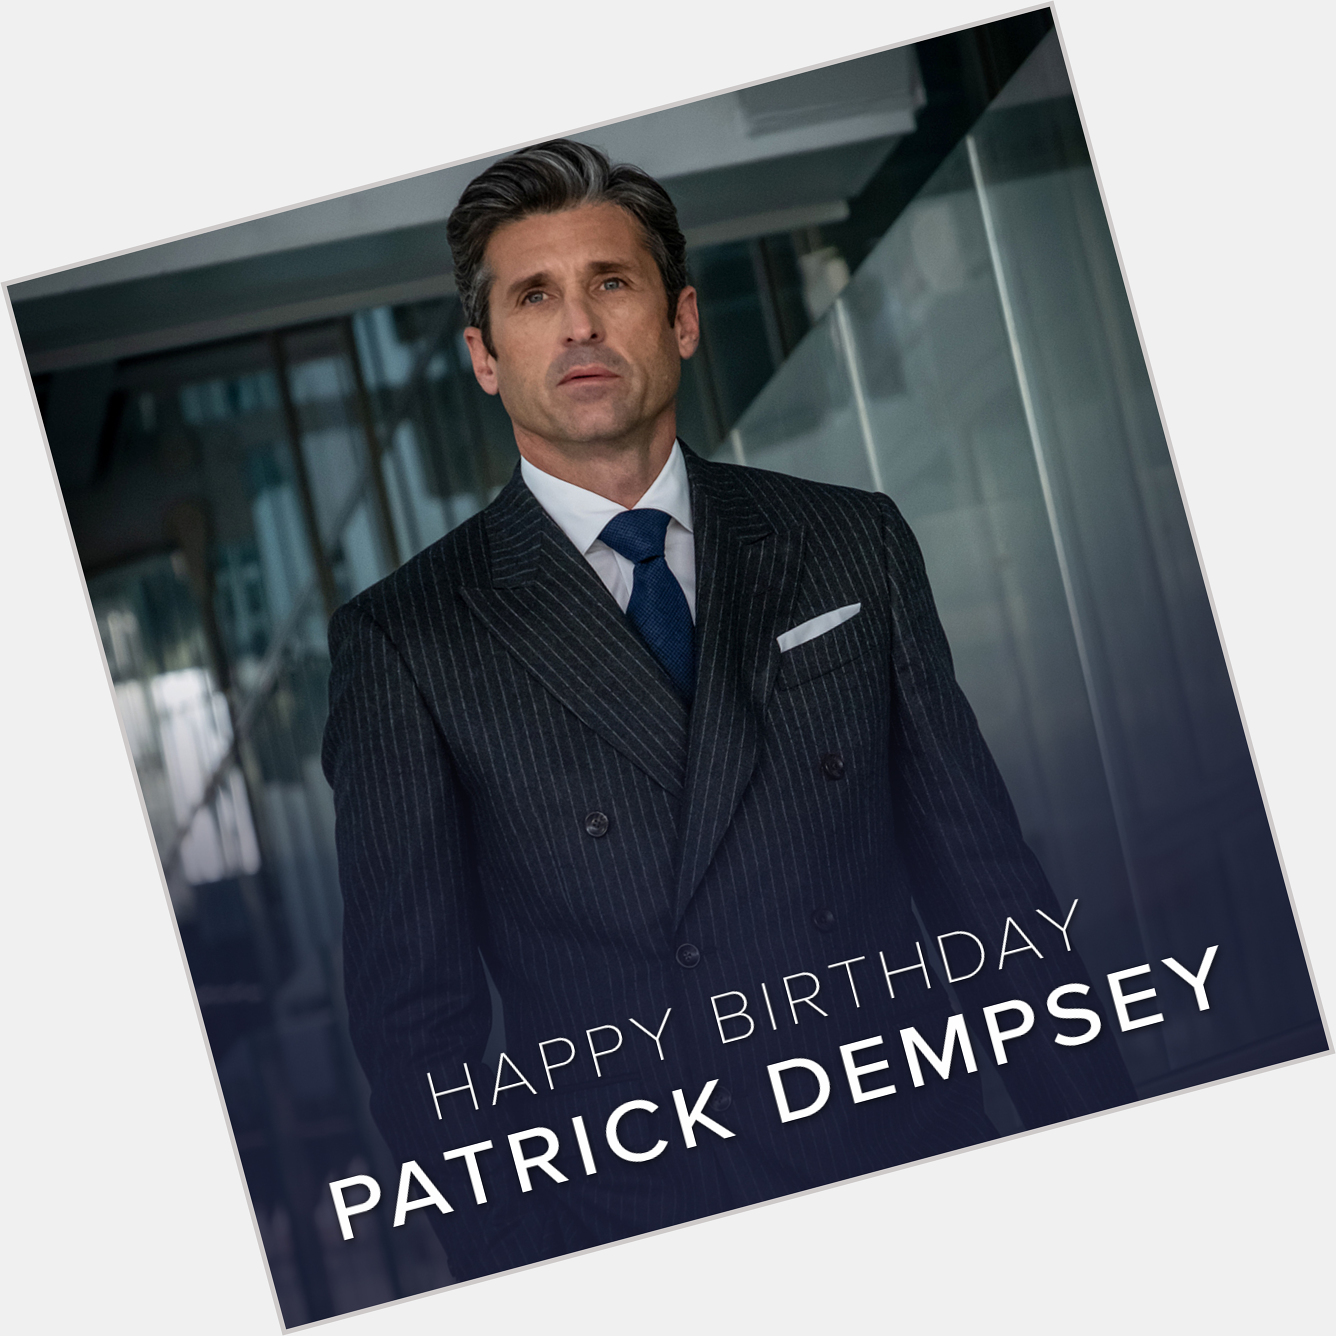 All about the money. Happy Birthday, Patrick Dempsey! 